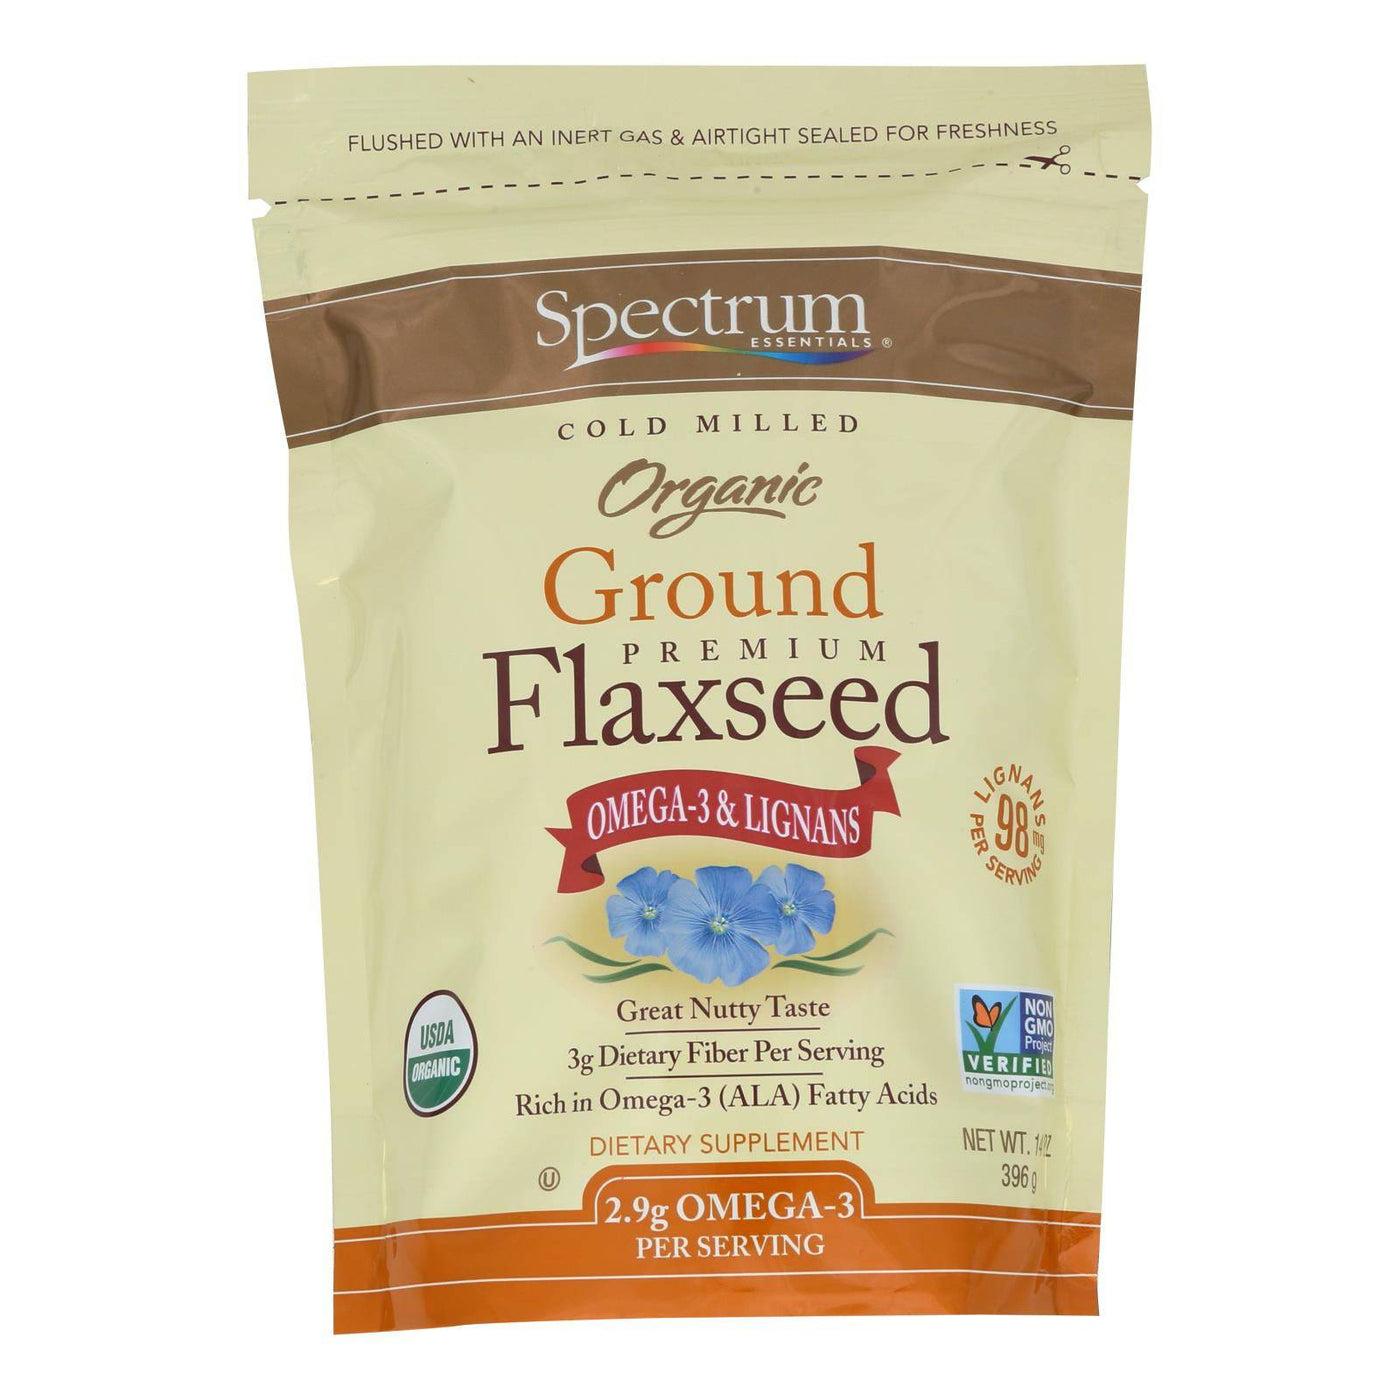 Buy Spectrum Essentials Organic Ground Flaxseed - 14 Oz  at OnlyNaturals.us